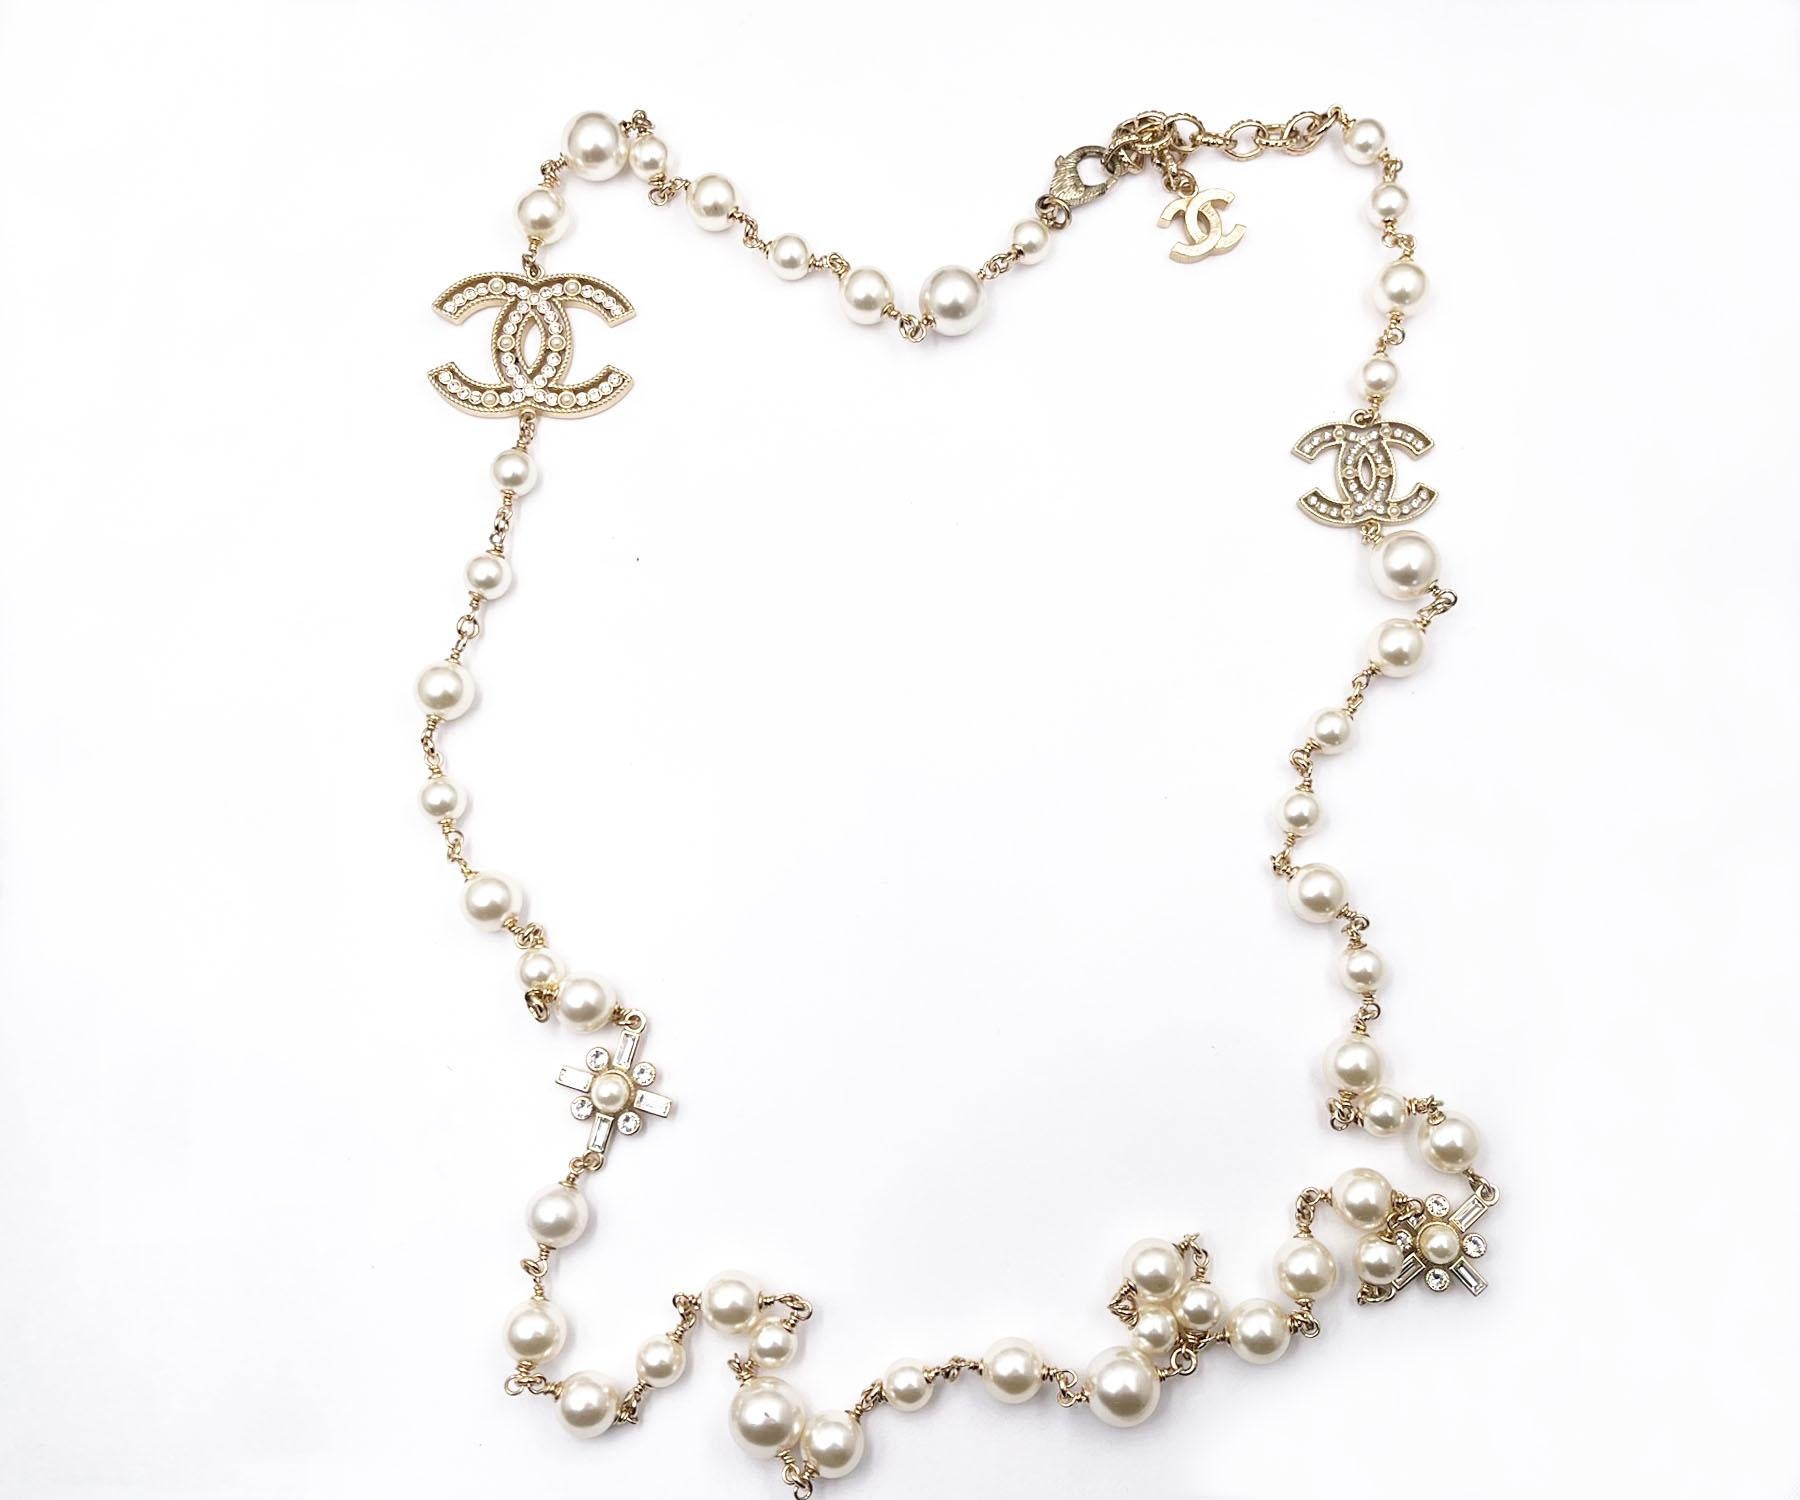 Chanel Gold CC Cross Crystal Pearl Necklace



*Marked 18

*Made in Italy

*Comes with the original box and pouch



-It is approximately 42